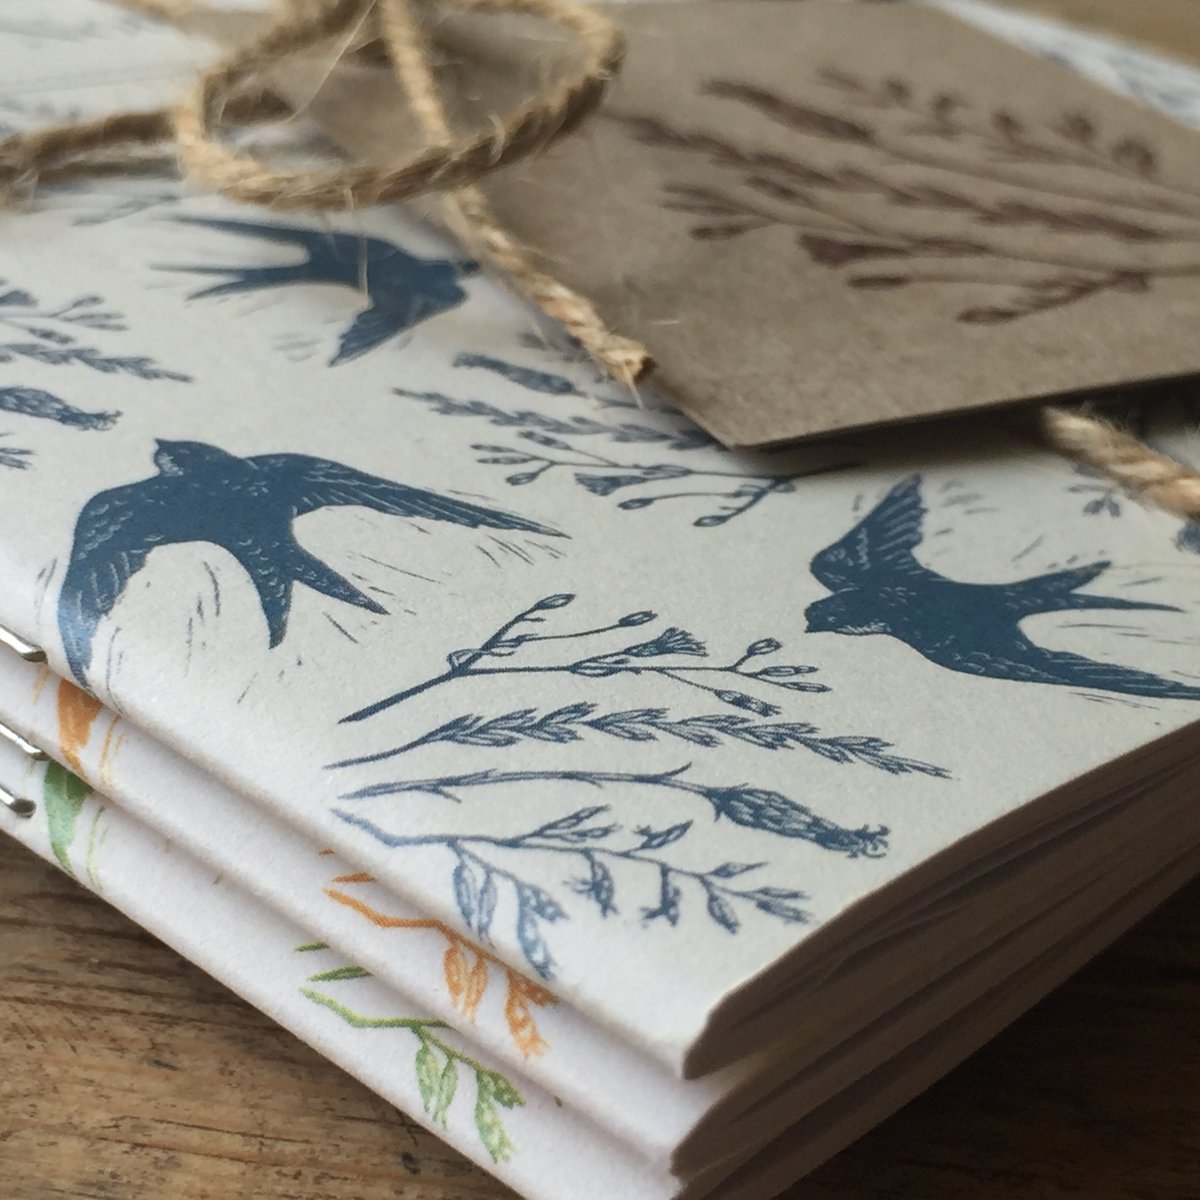 Just one more of these packs of notebooks left until my local printer delivers some more. I hope that, like the swifts illustrated, they'll fly here soon 💚#earlybiz #shopsmall #giftfornaturelover #swifts sarahrobinsondesigns.etsy.com/listing/159077…